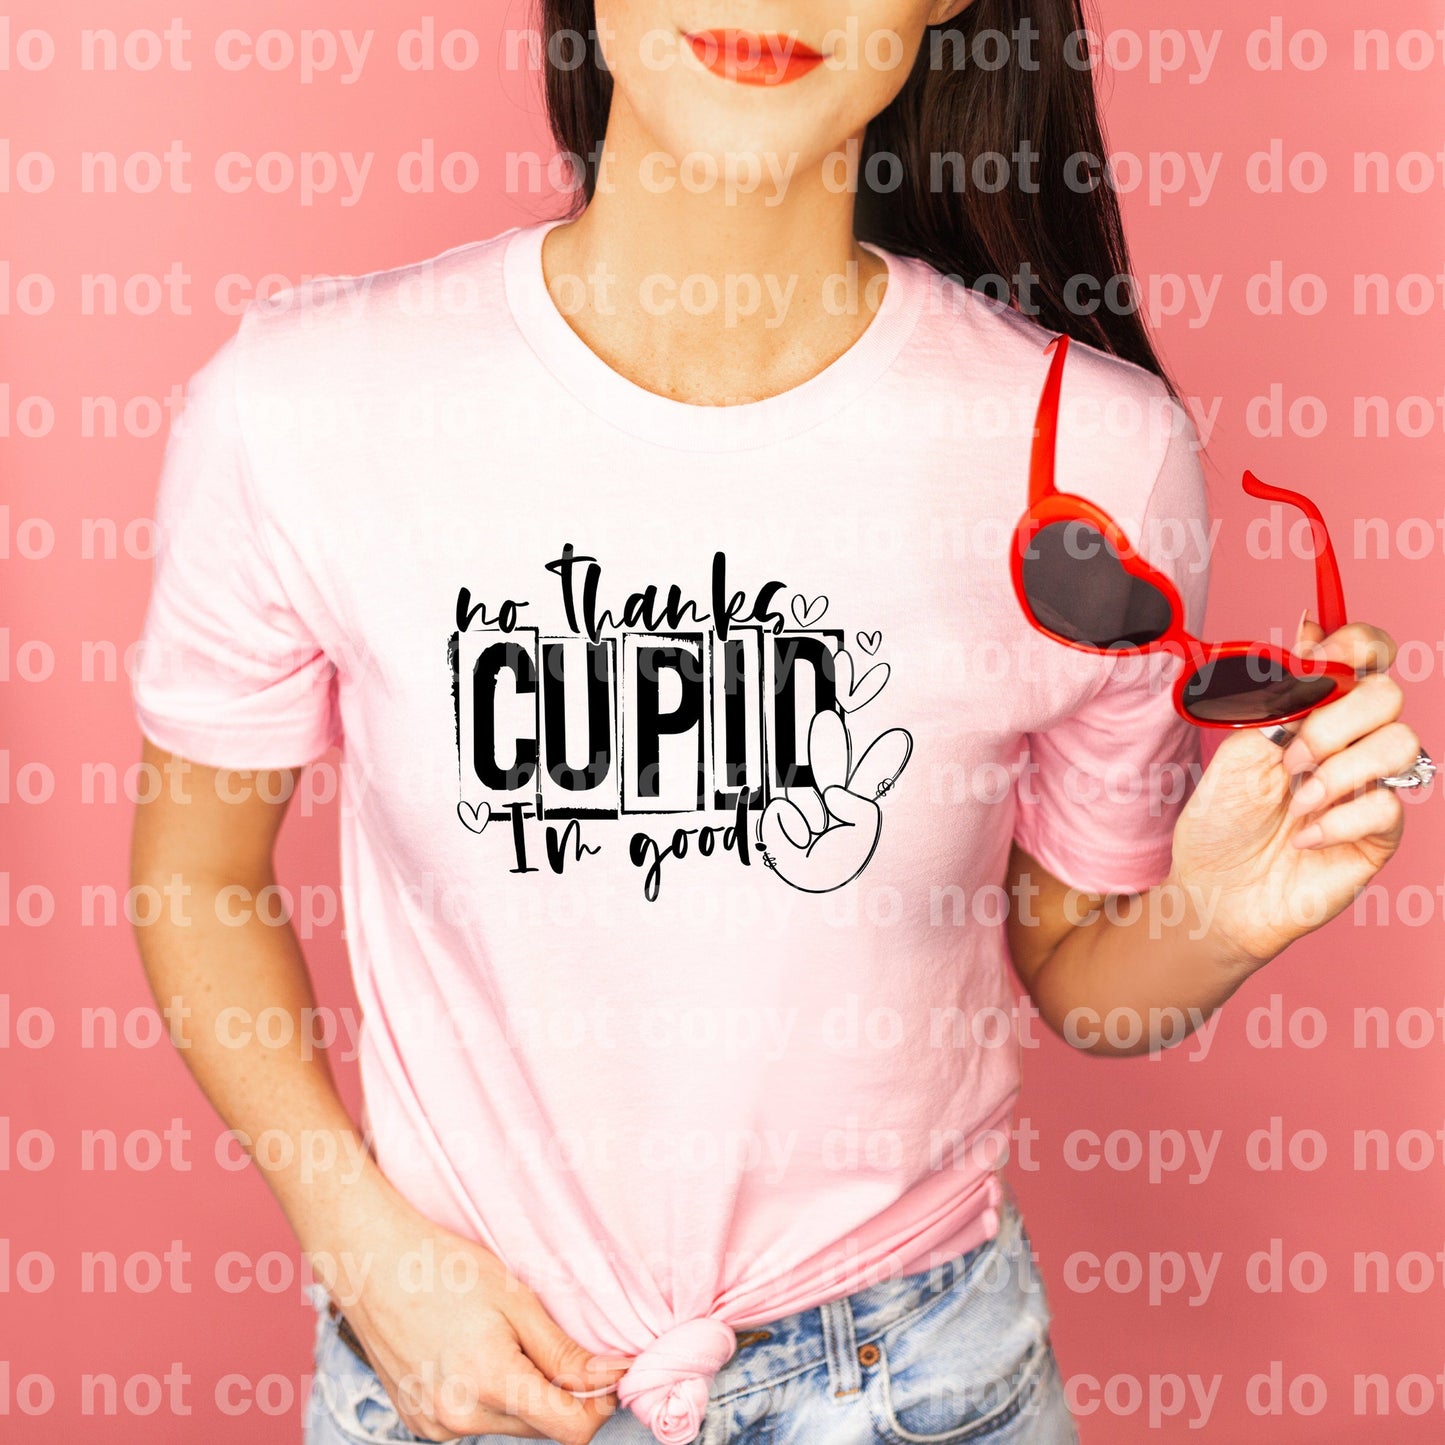 No Thanks Cupid I'm Good Full Color/One Color Dream Print or Sublimation Print